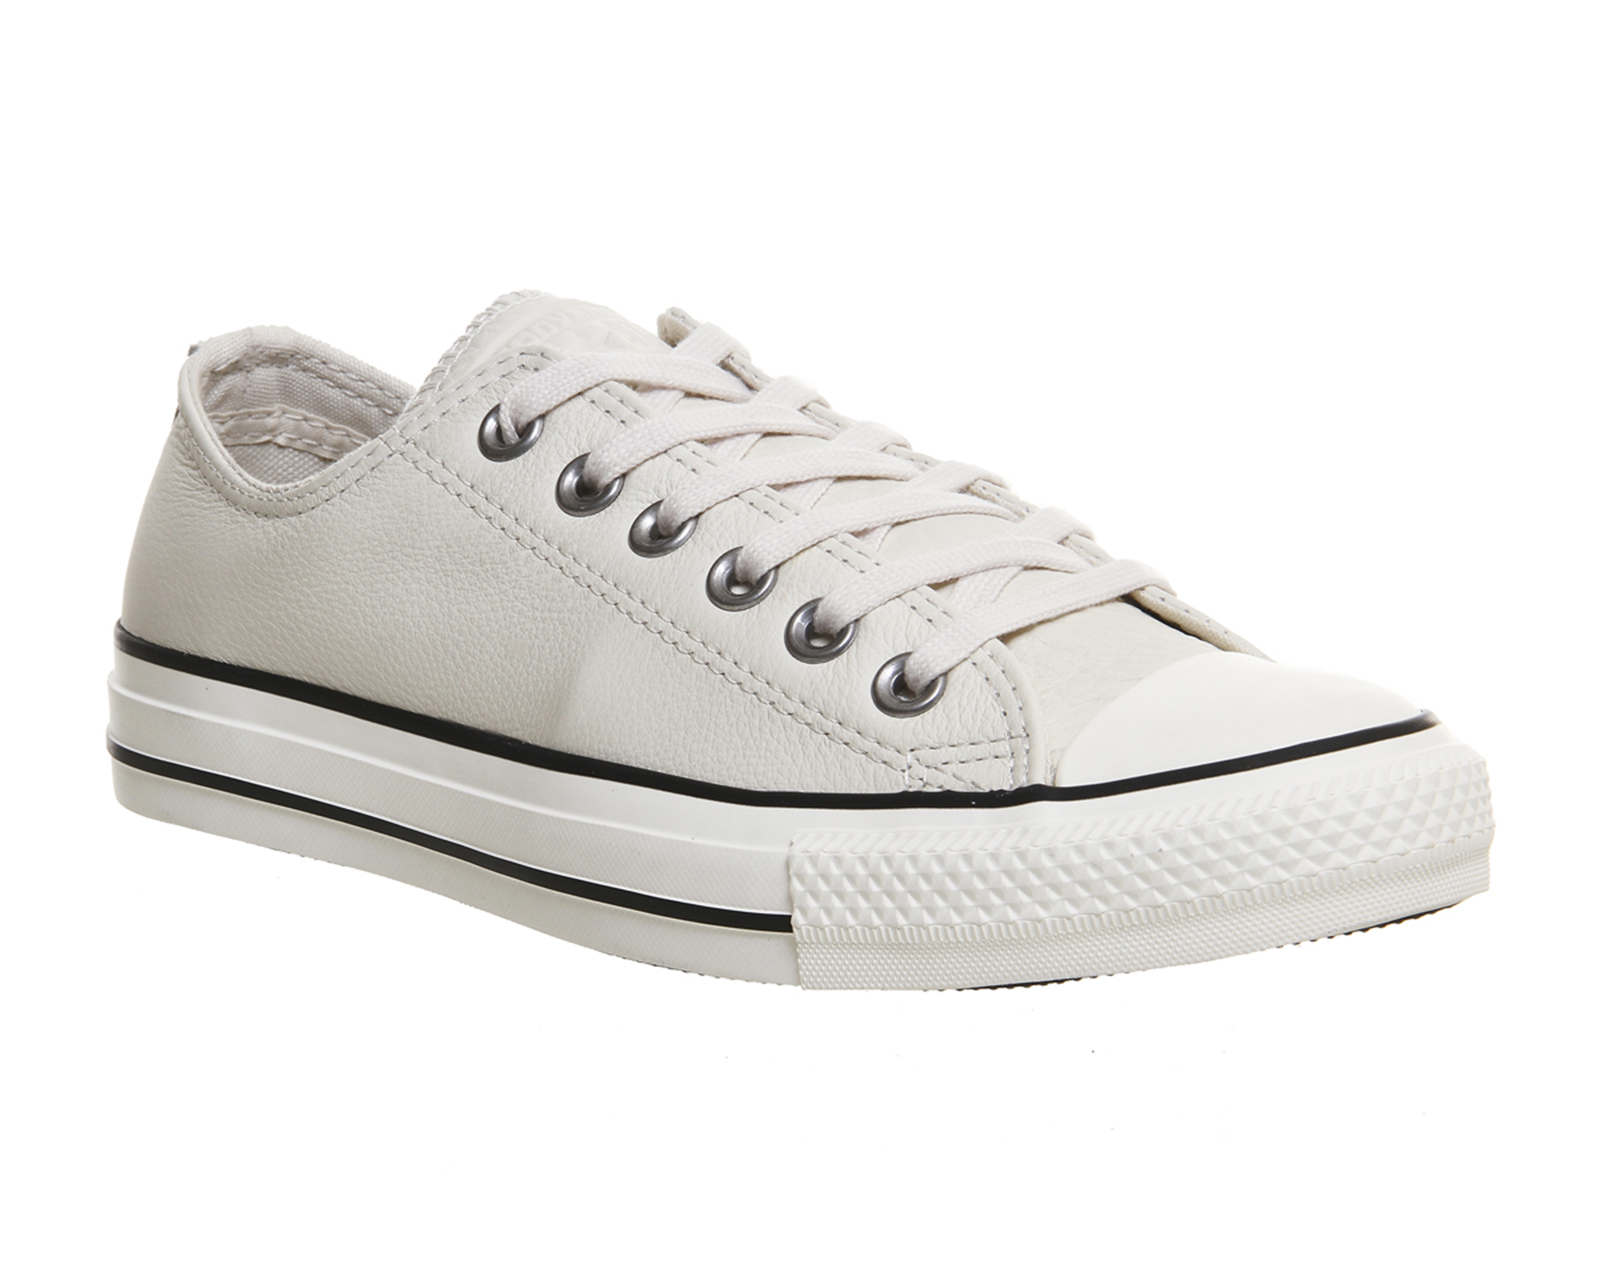 ConverseAll Star Low LeatherParchment Black White